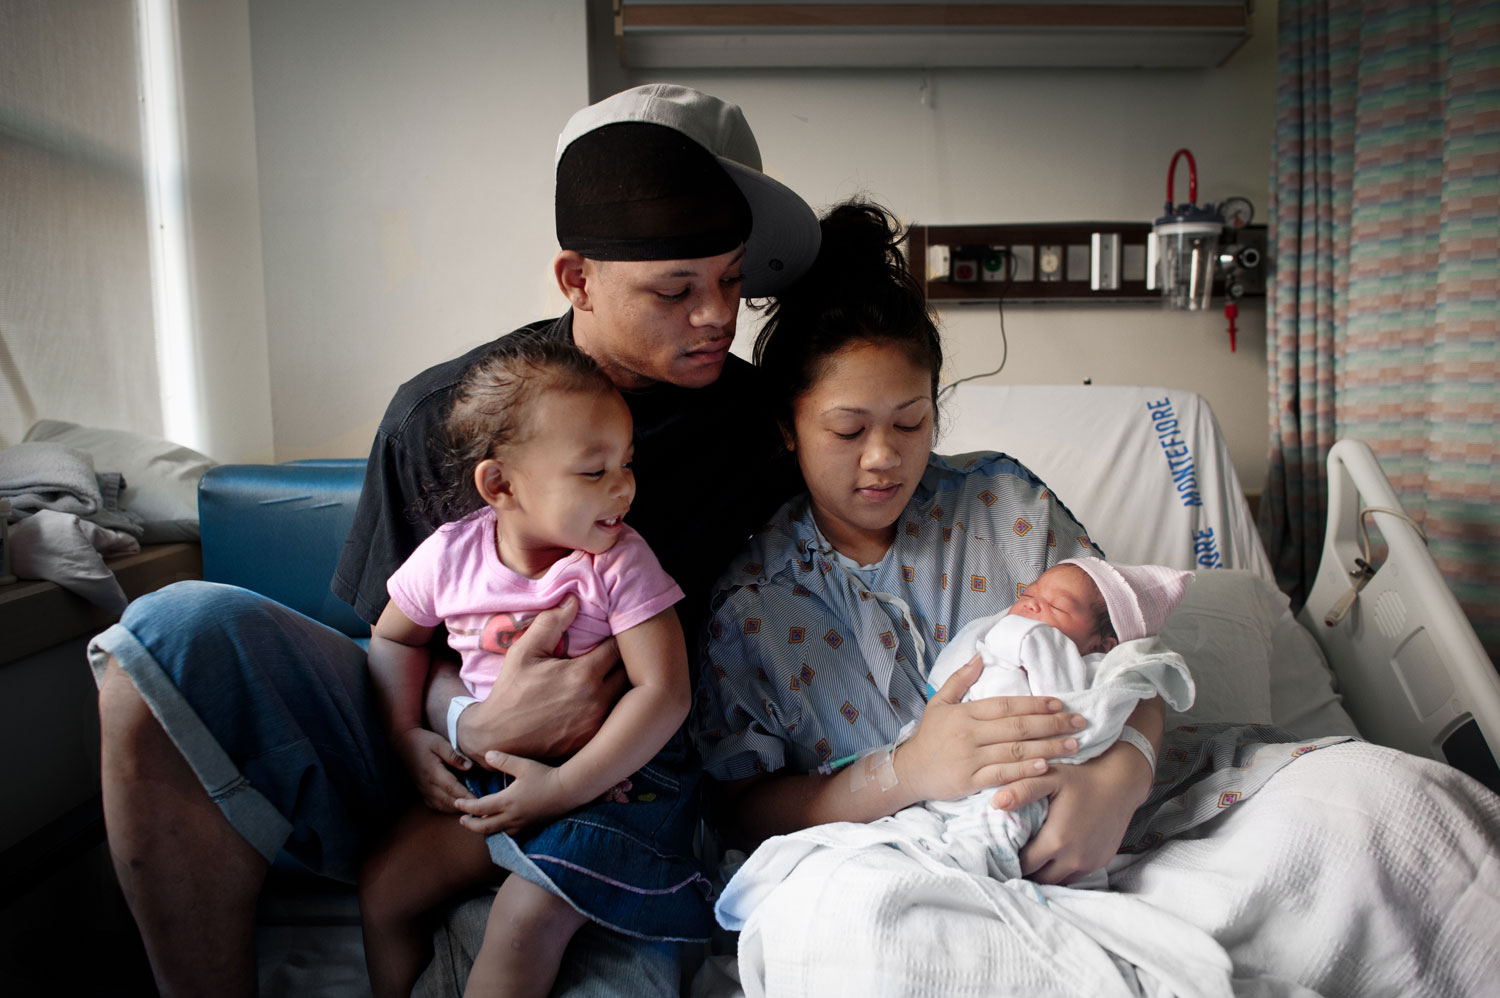 Bronx, New York City, September 2011.Joseph, 30, Sothea, 28, and Sovahnny, 2, at Montefiore hospital in the Bronx, NY, hours after the delivery of the newest addition to their family.